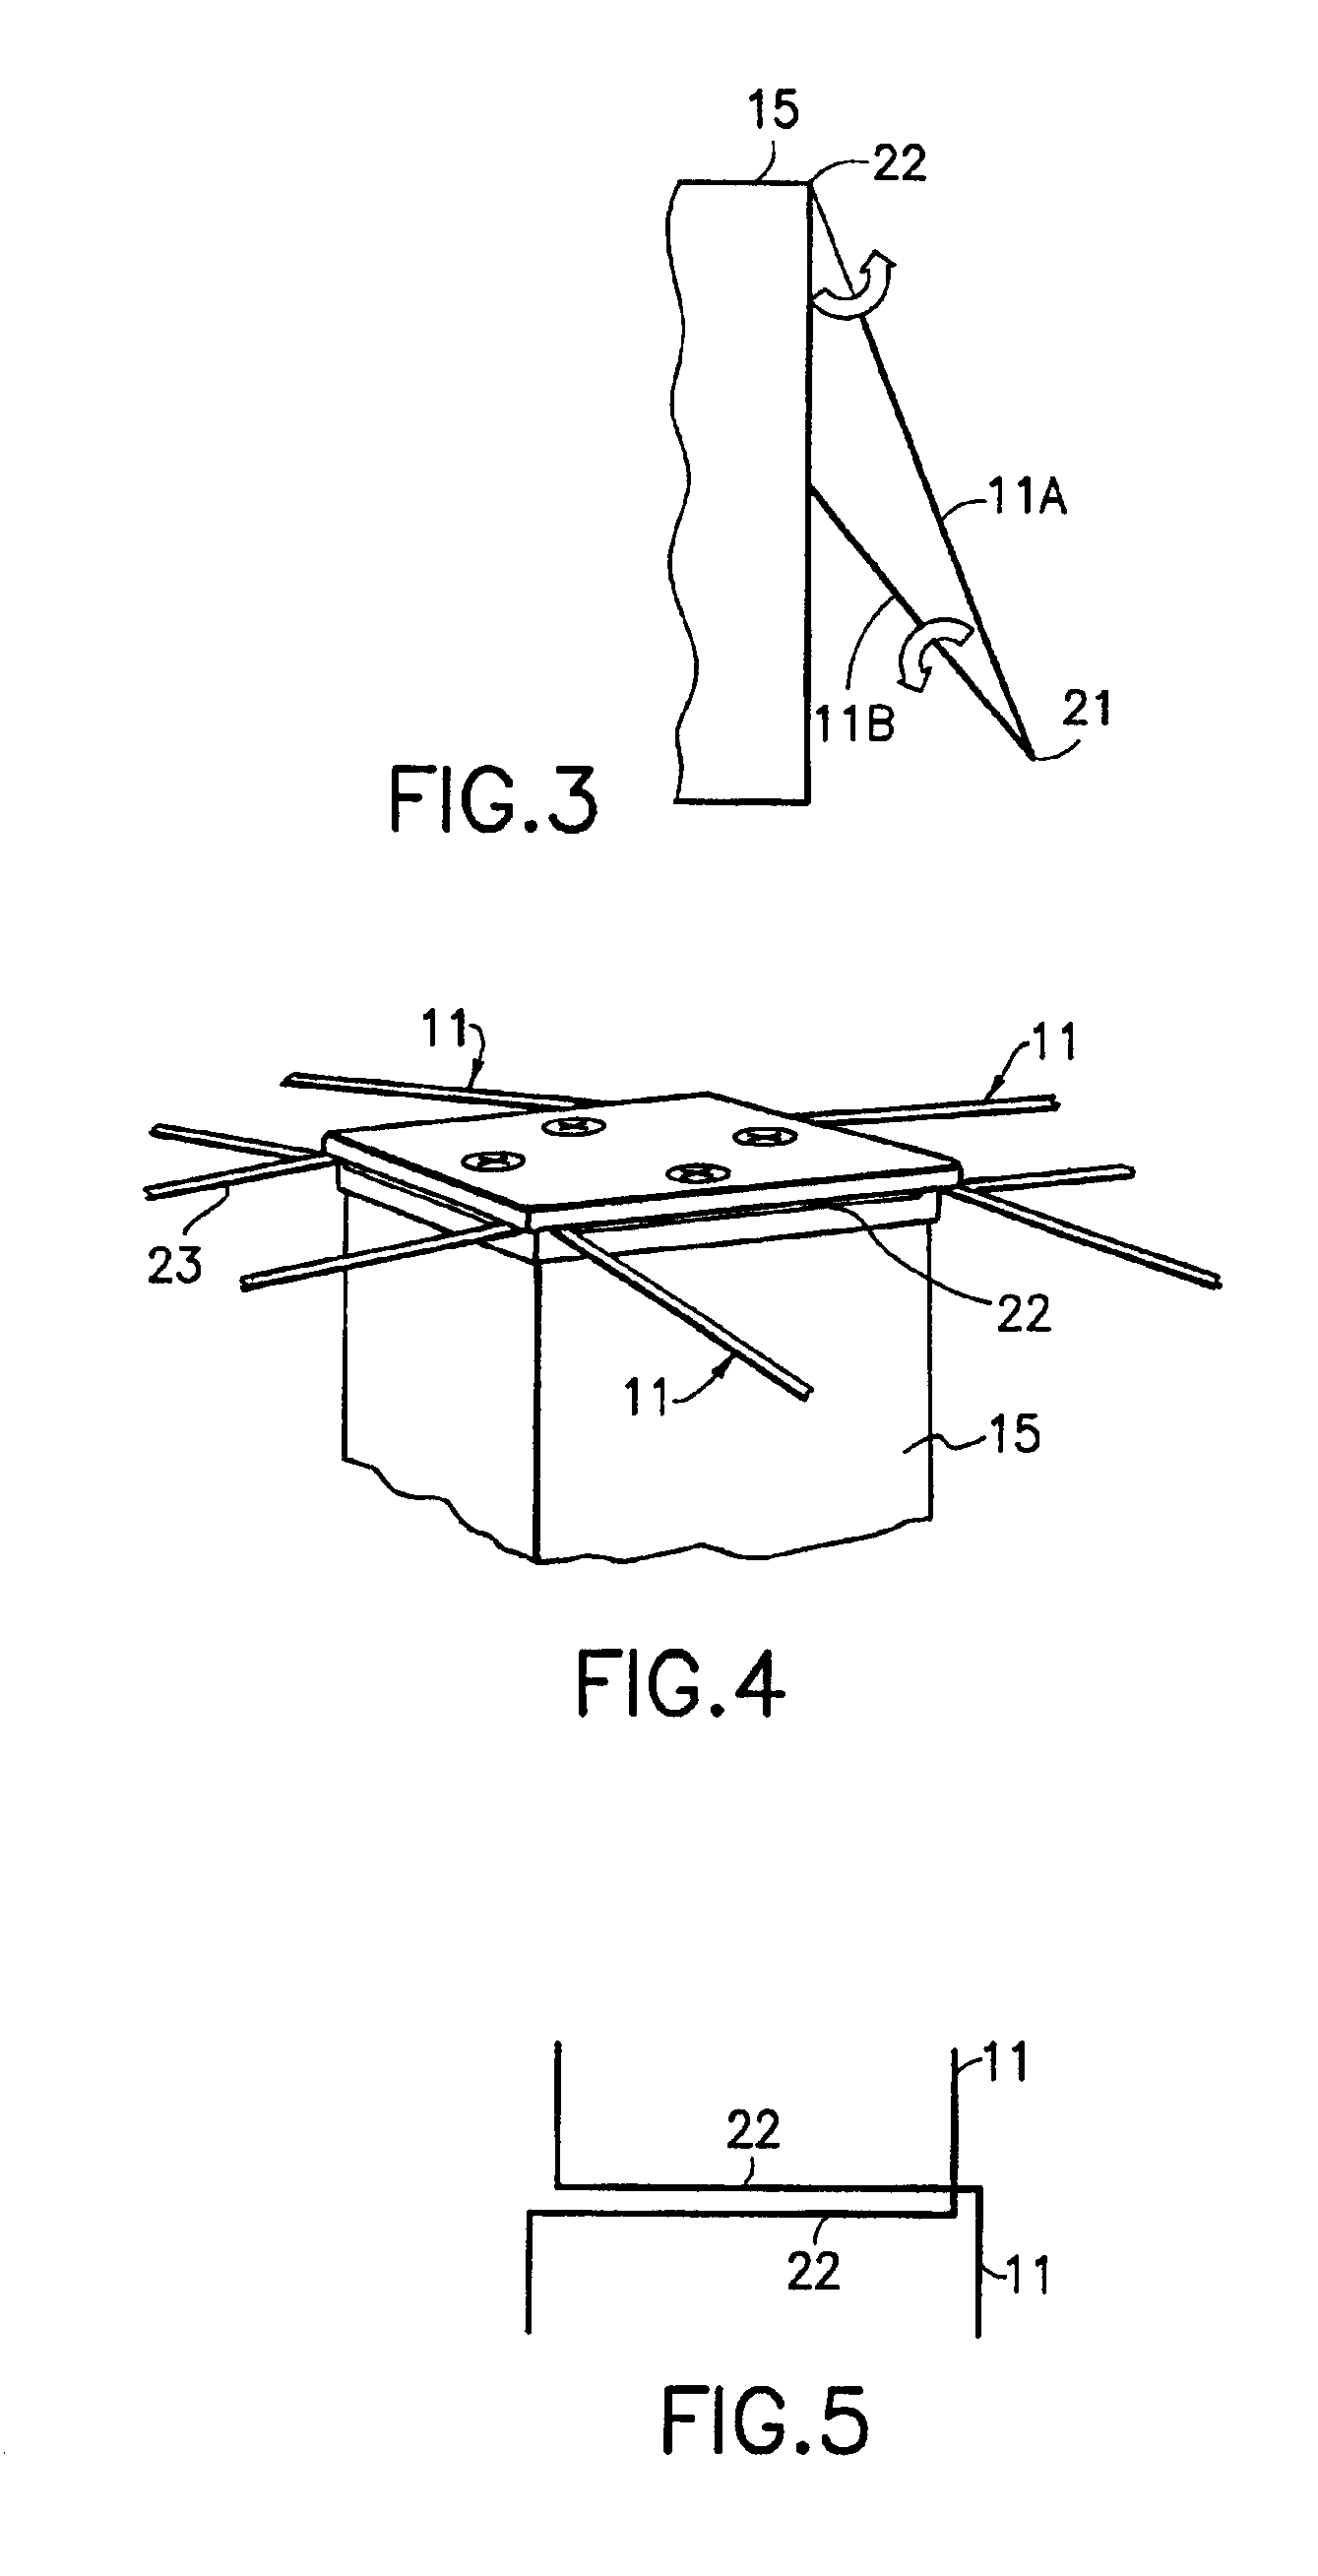 Method and apparatus for storage and deployment of folded panel structures